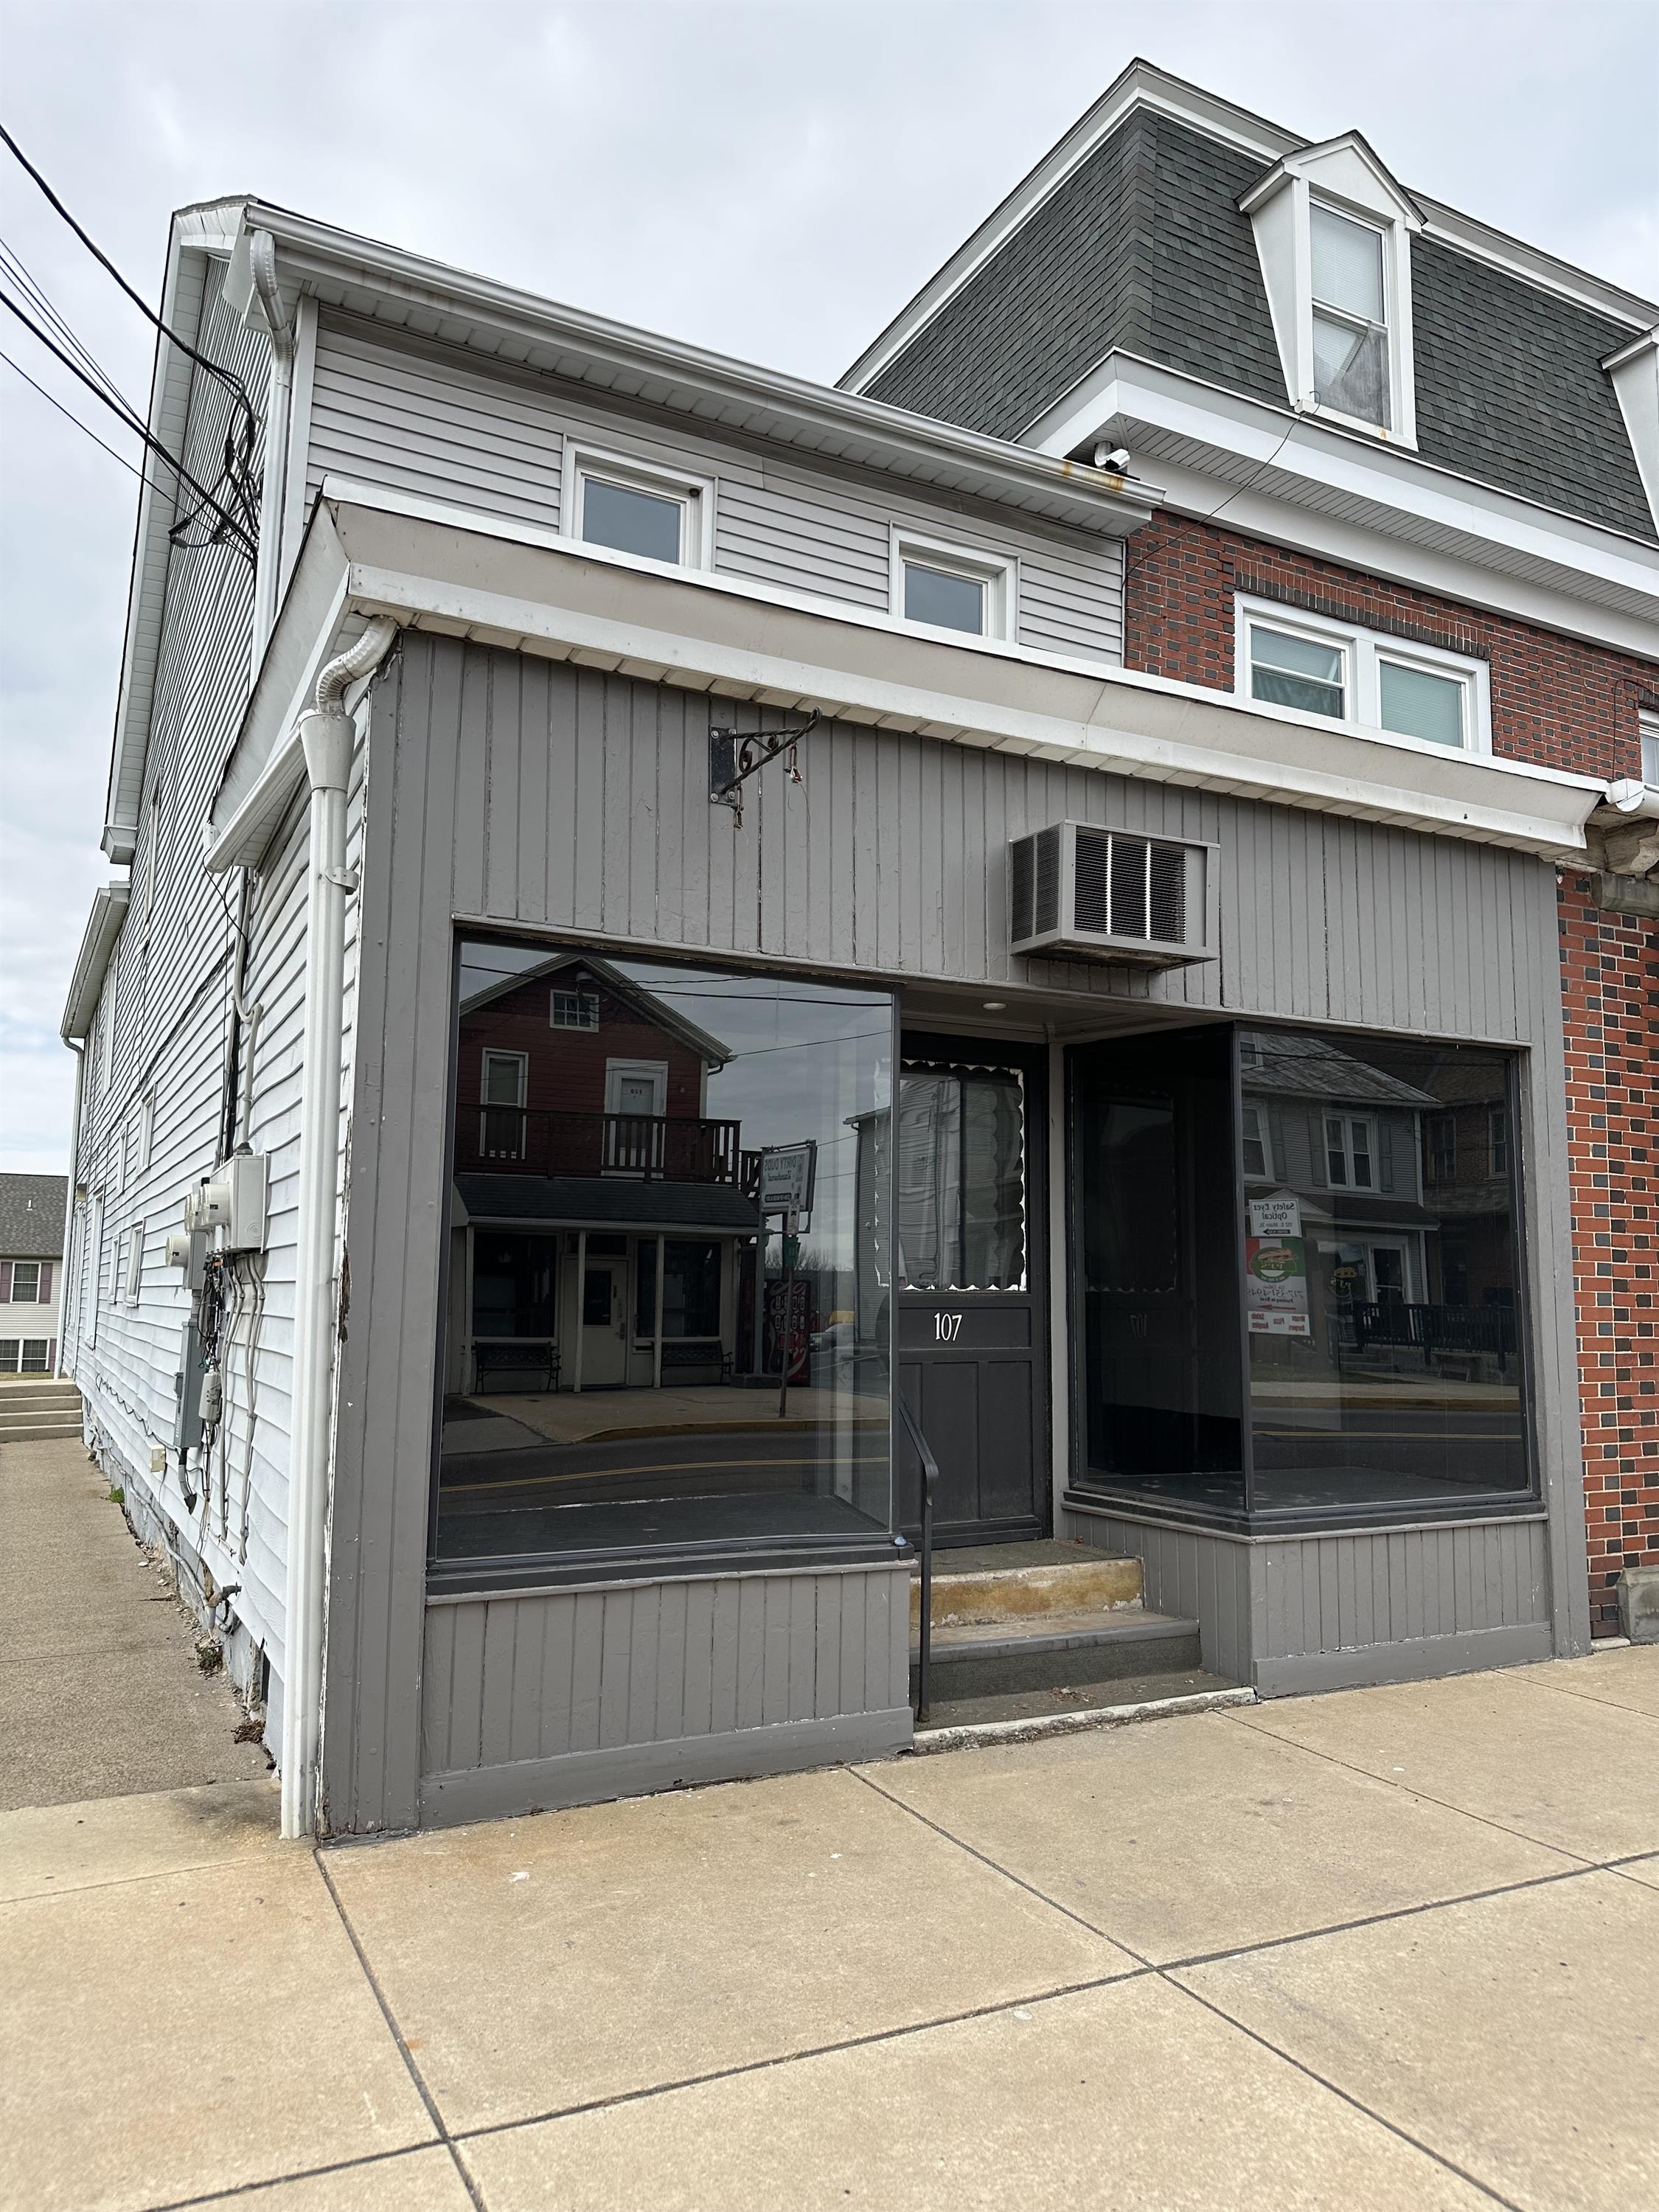 107 East Main Street - Commercial Retail Store